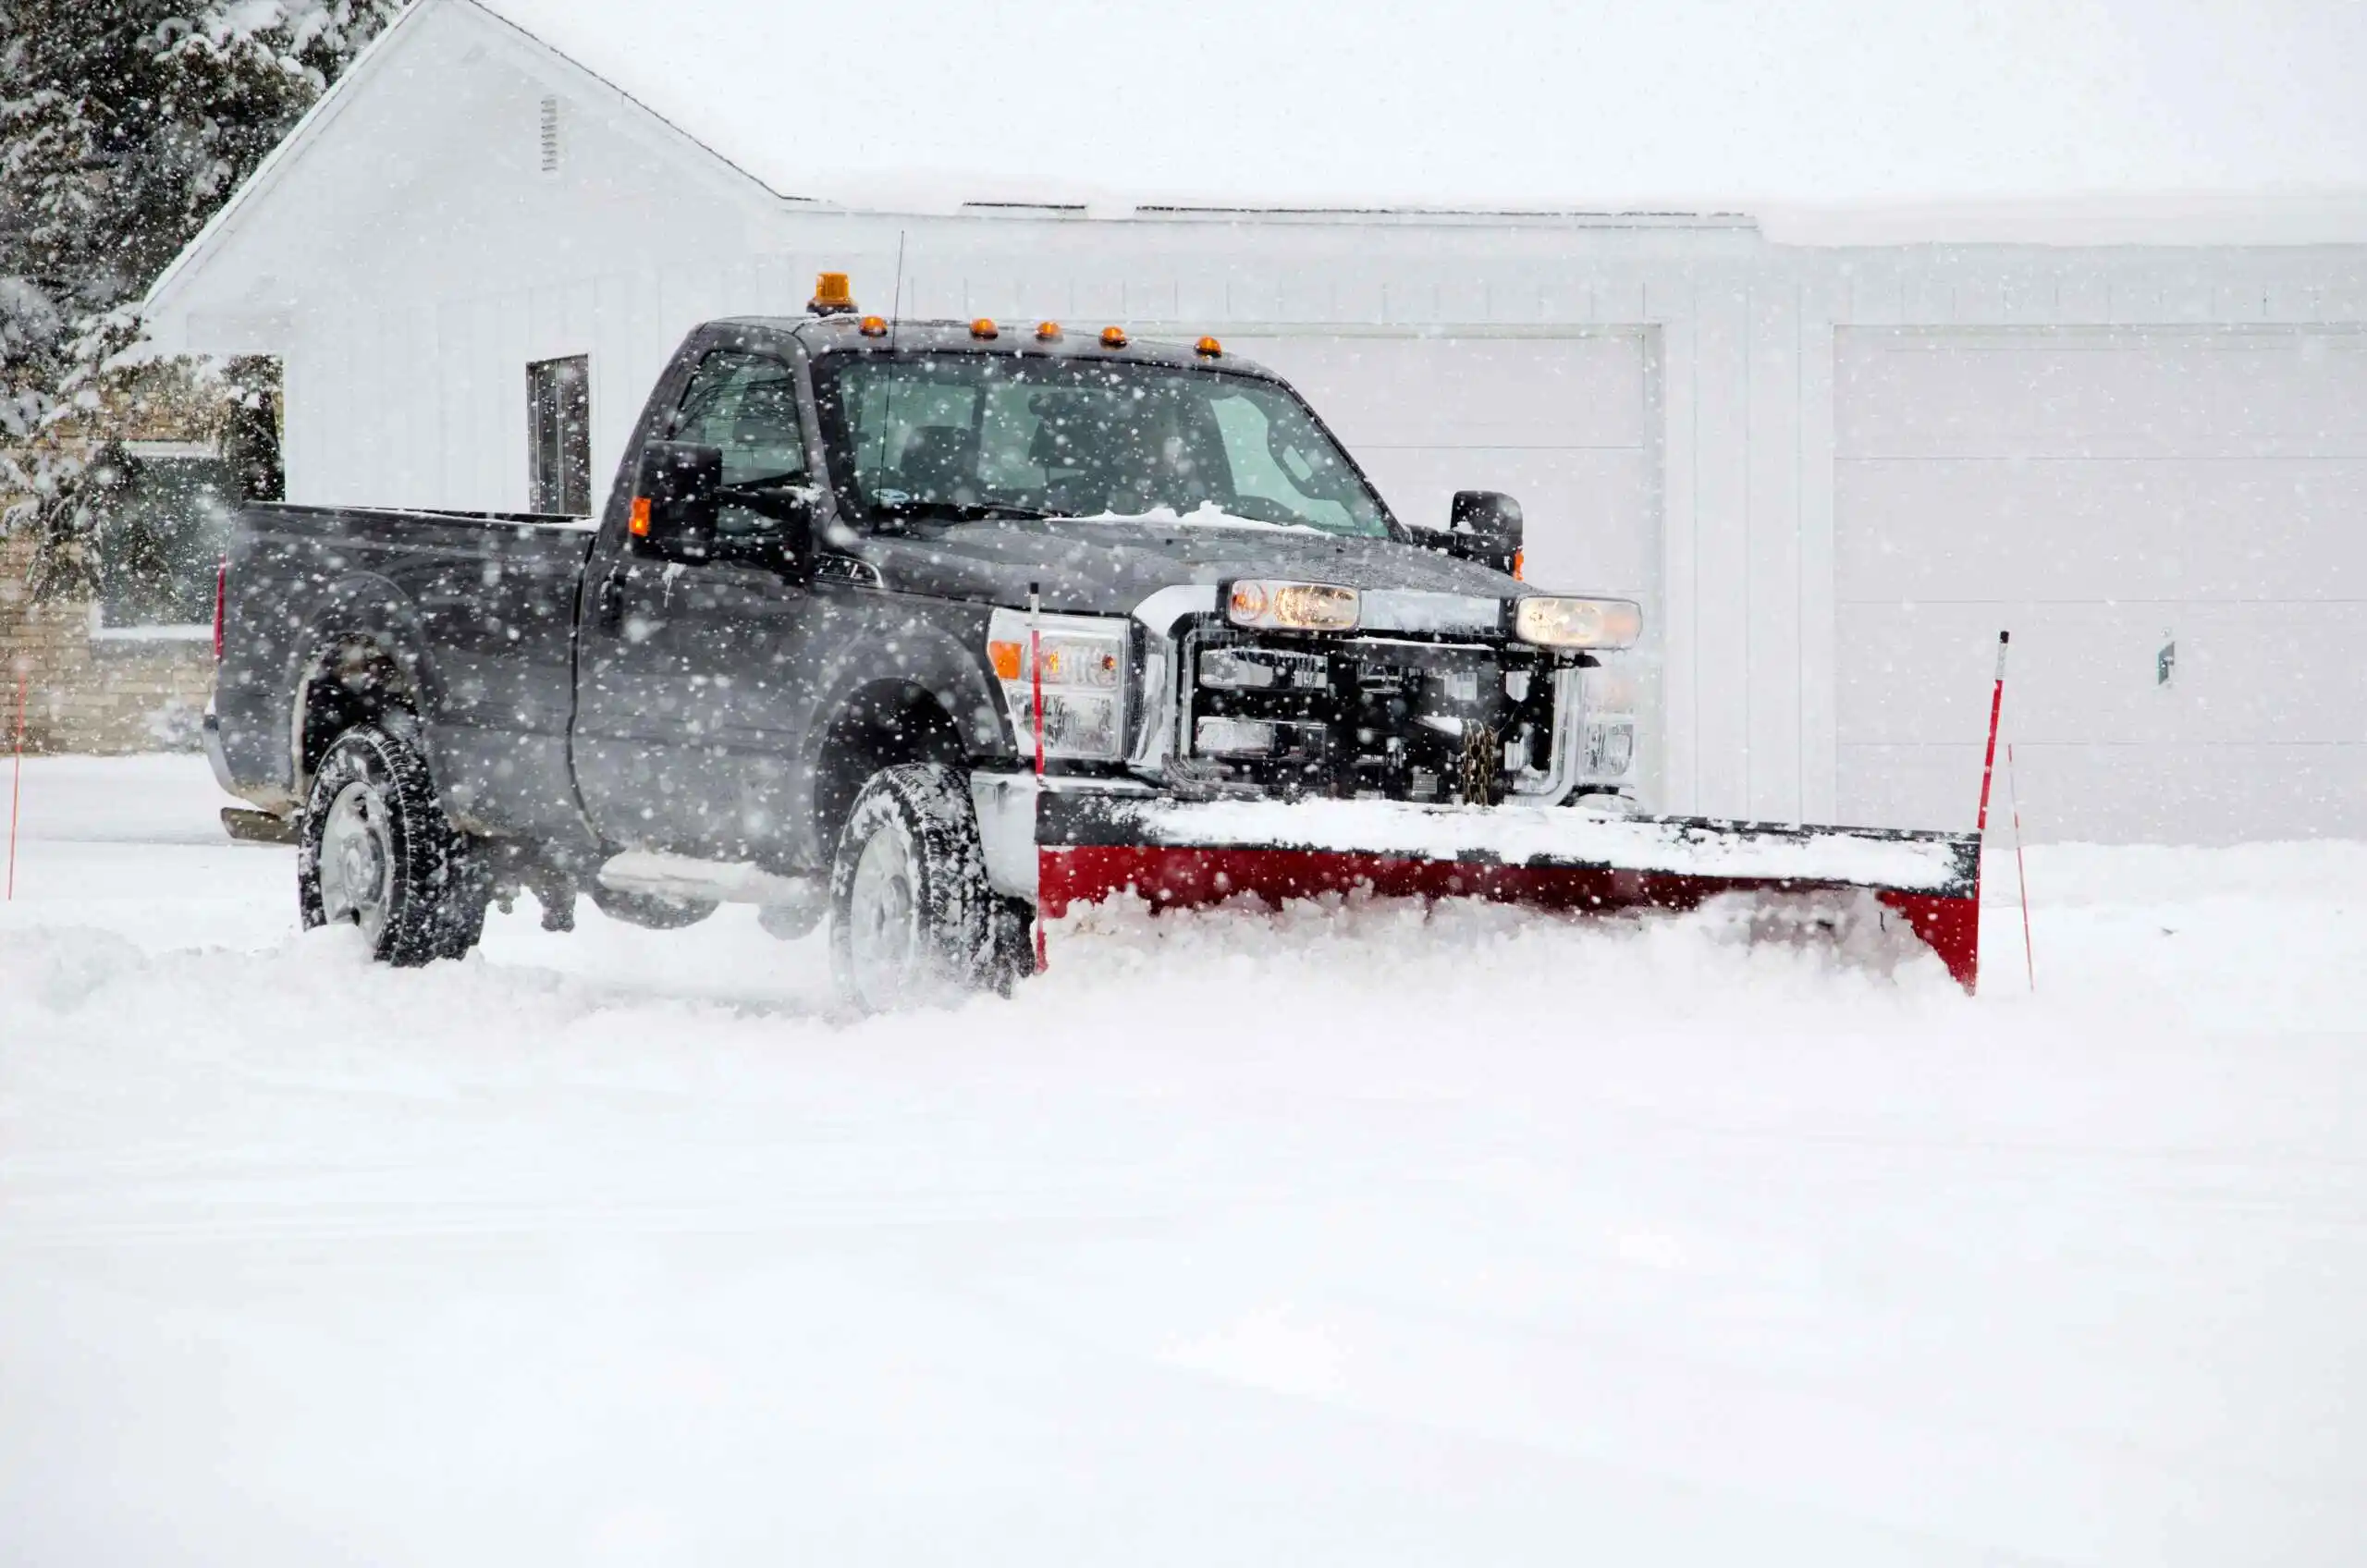 Service for Snow removal for seniors in Canada